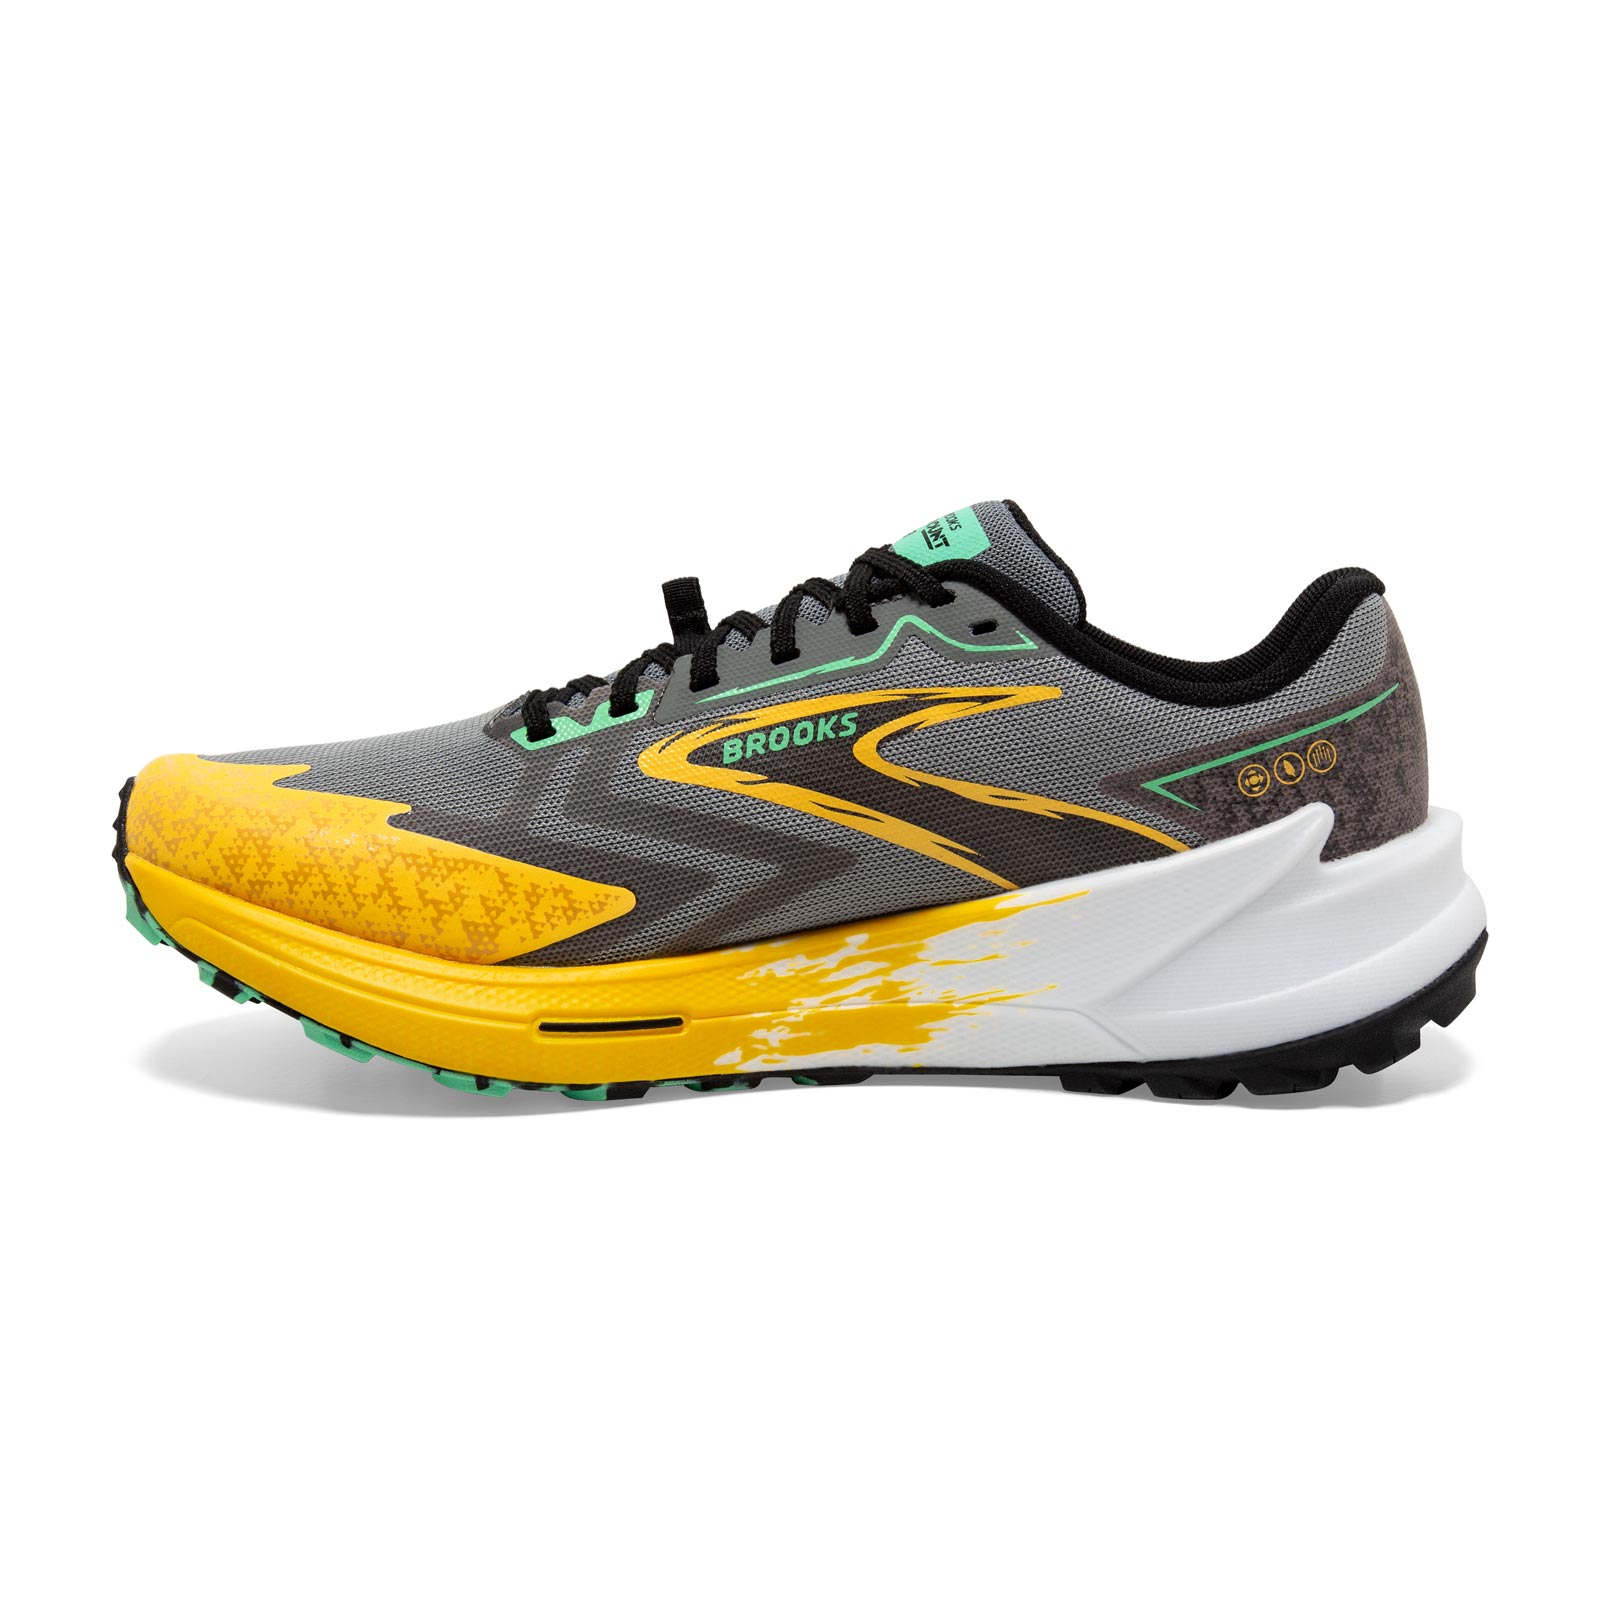 BROOKS CATAMOUNT 3 MENS TRAIL RUNNING SHOES